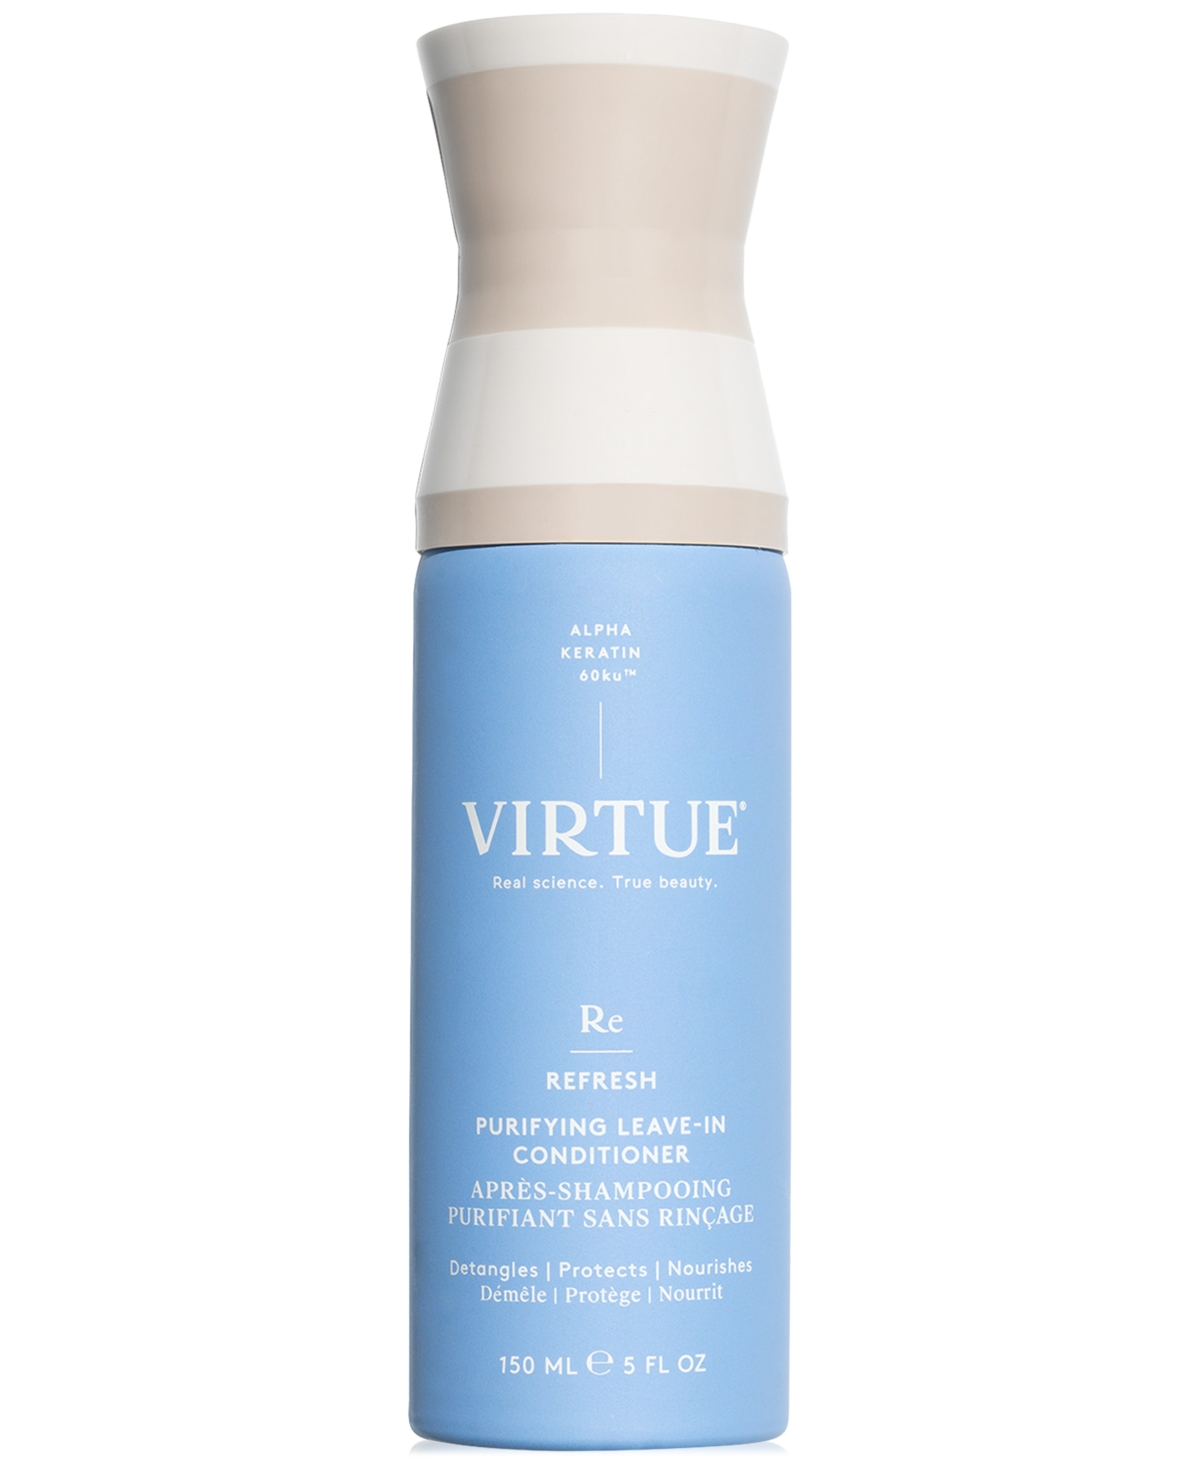 Refresh Purifying Leave-In Conditioner, 150 ml